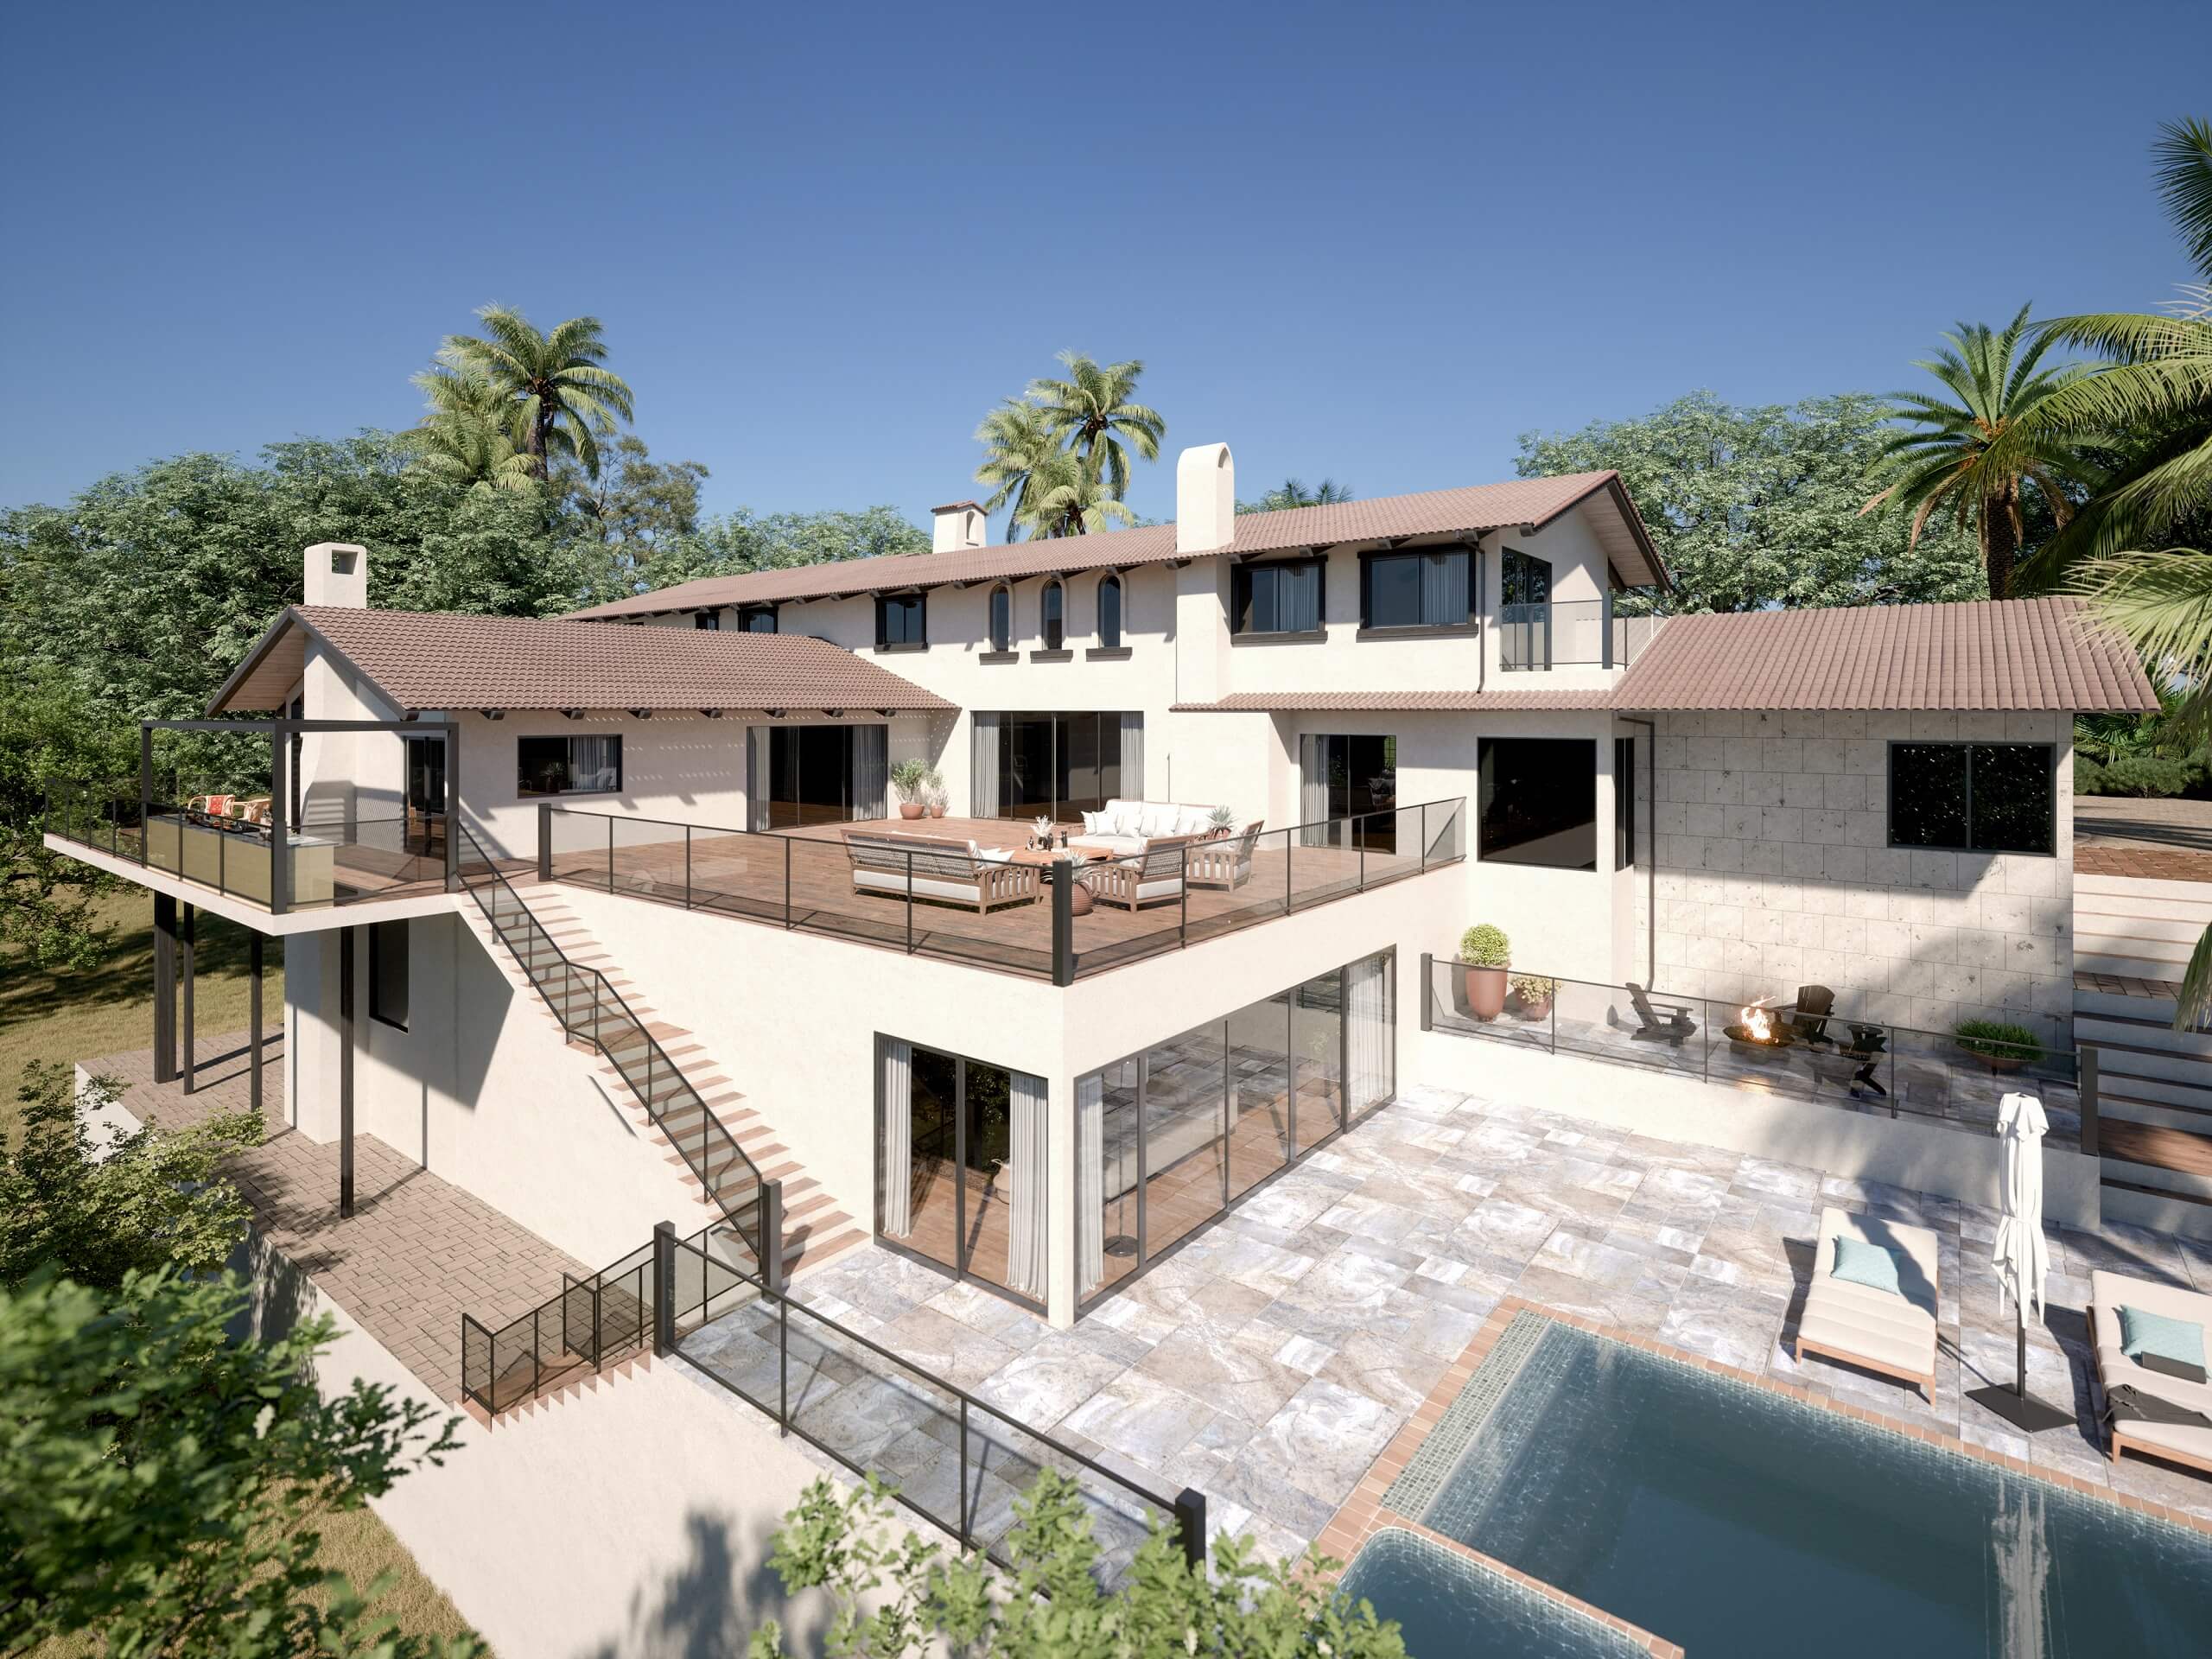 3D Visualization of a Residential Property